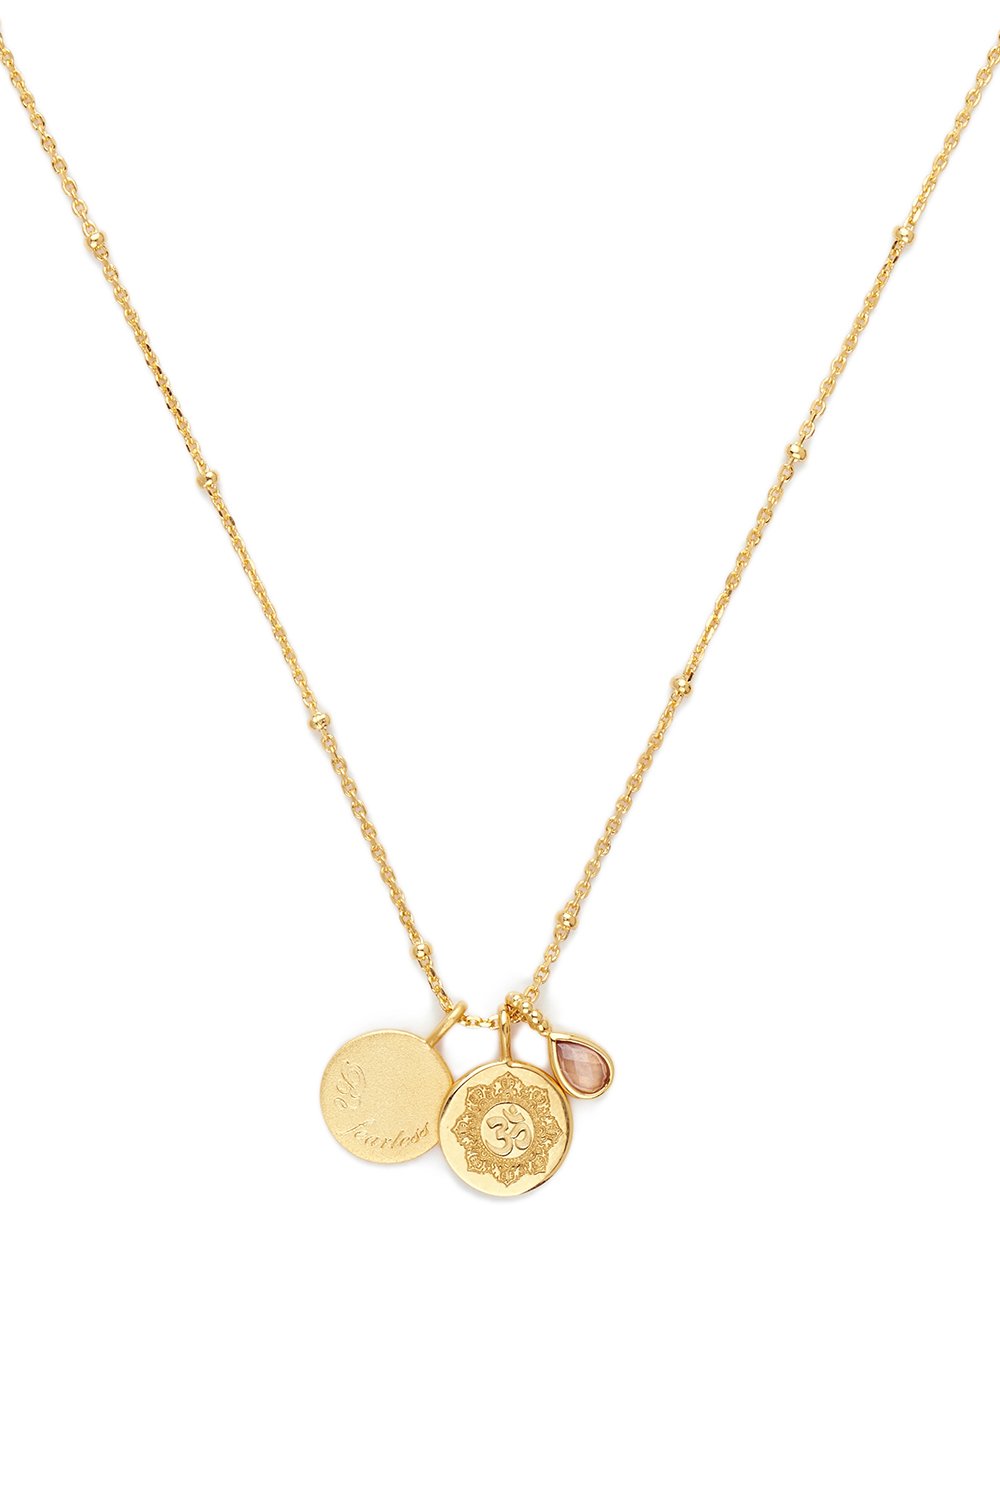 BY CHARLOTTE BEYOND SUN NECKLACE GOLD